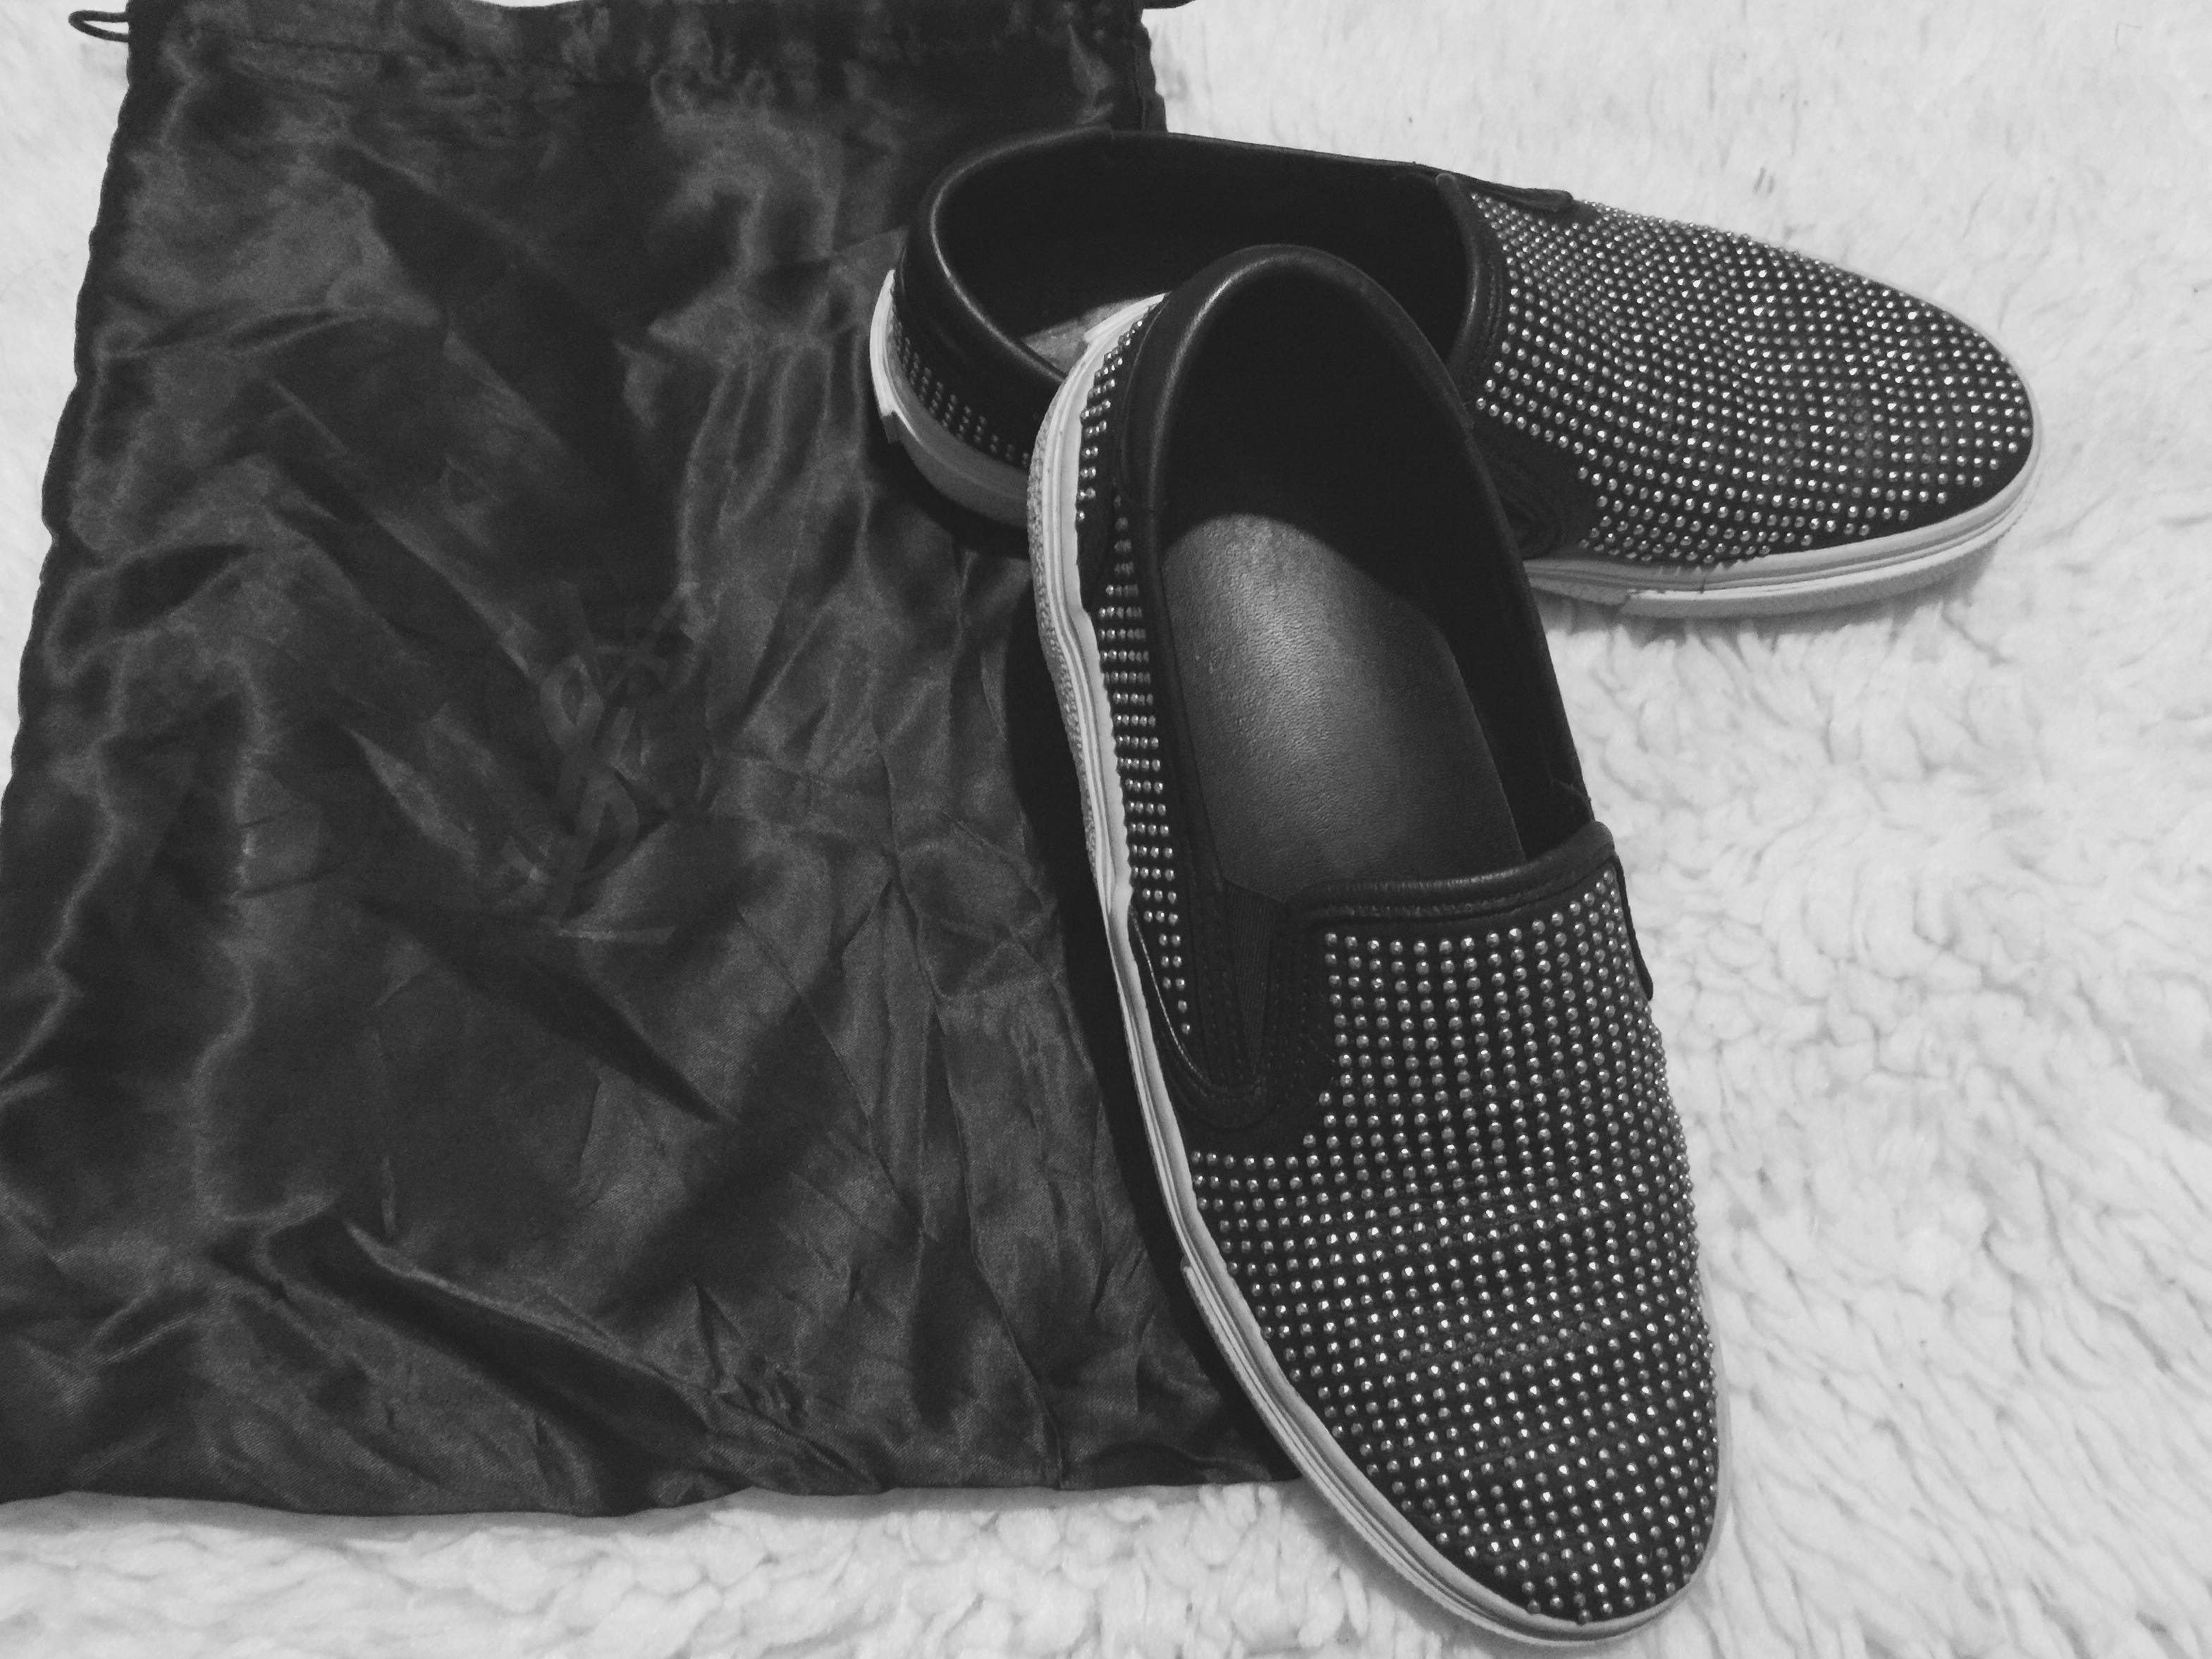 slip on leather sneakers